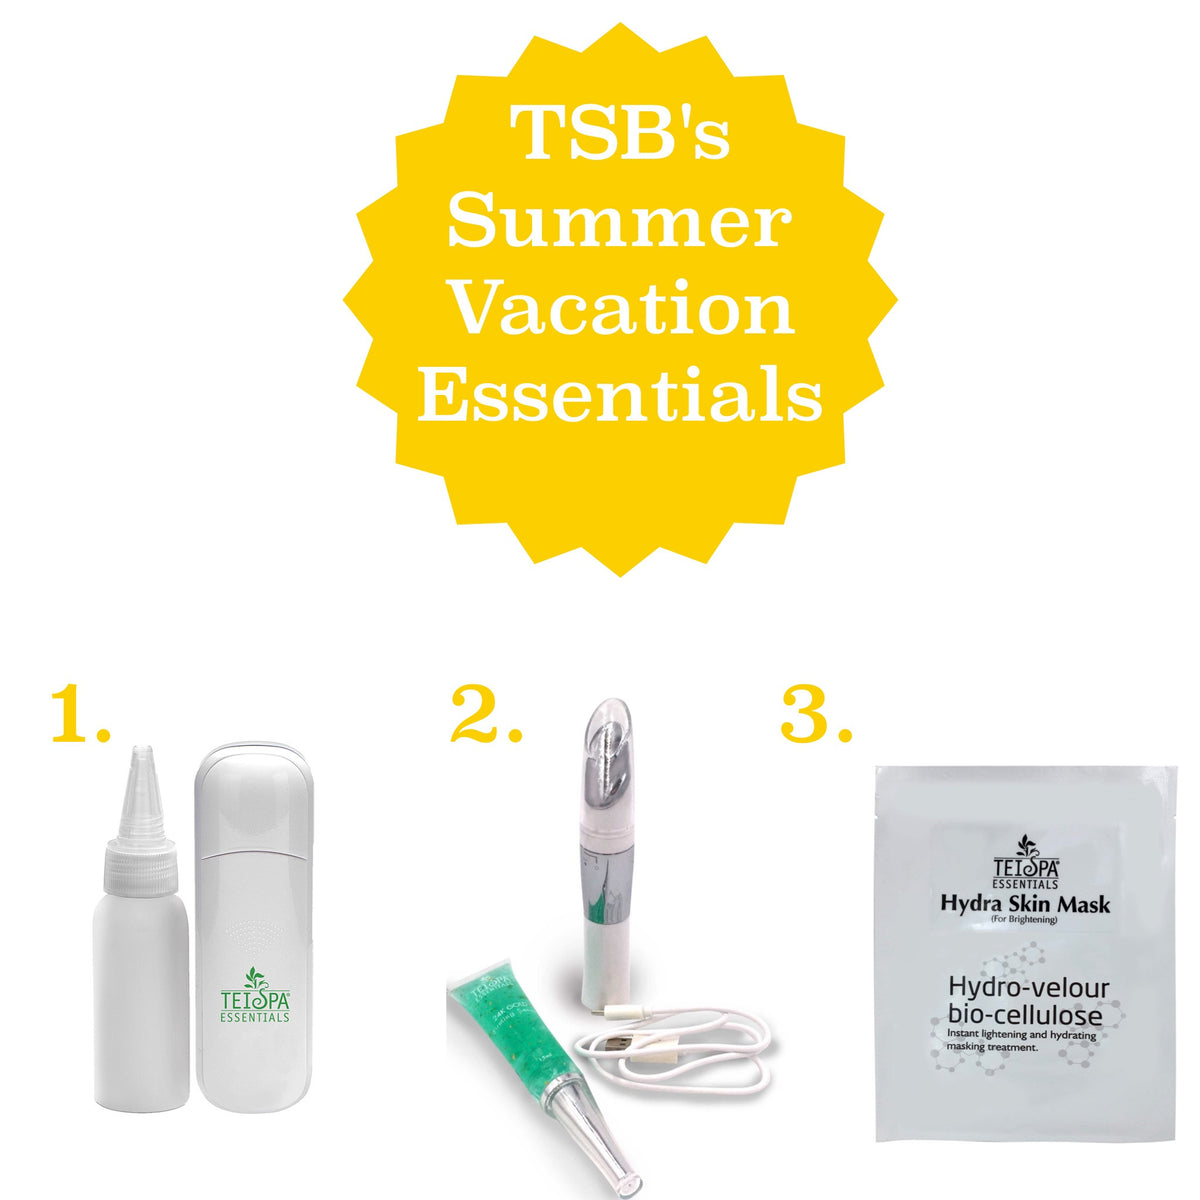 TEI Spa Beauty's 3 Summer Vacation Essentials